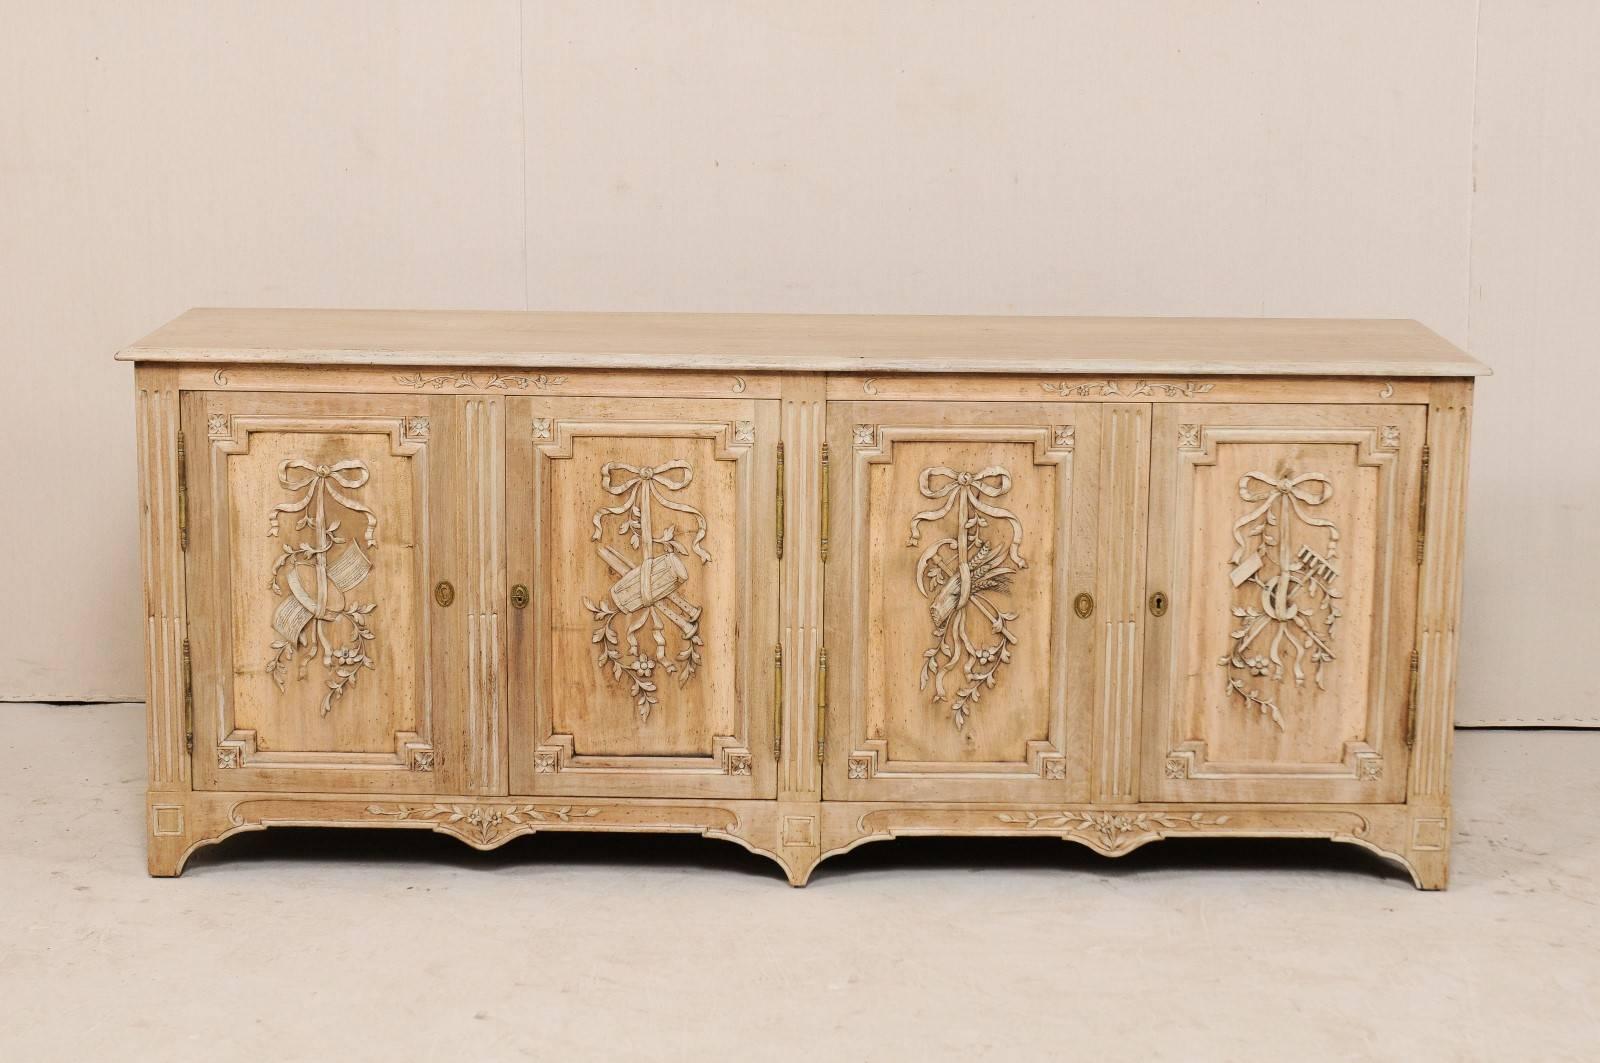 A French mid-20th century wood buffet cabinet. This midcentury French sideboard, approximately 7 feet in length, appears to tell a story with it's four delightfully and intricately decorated doors, having wood carved motifs consisting of musical